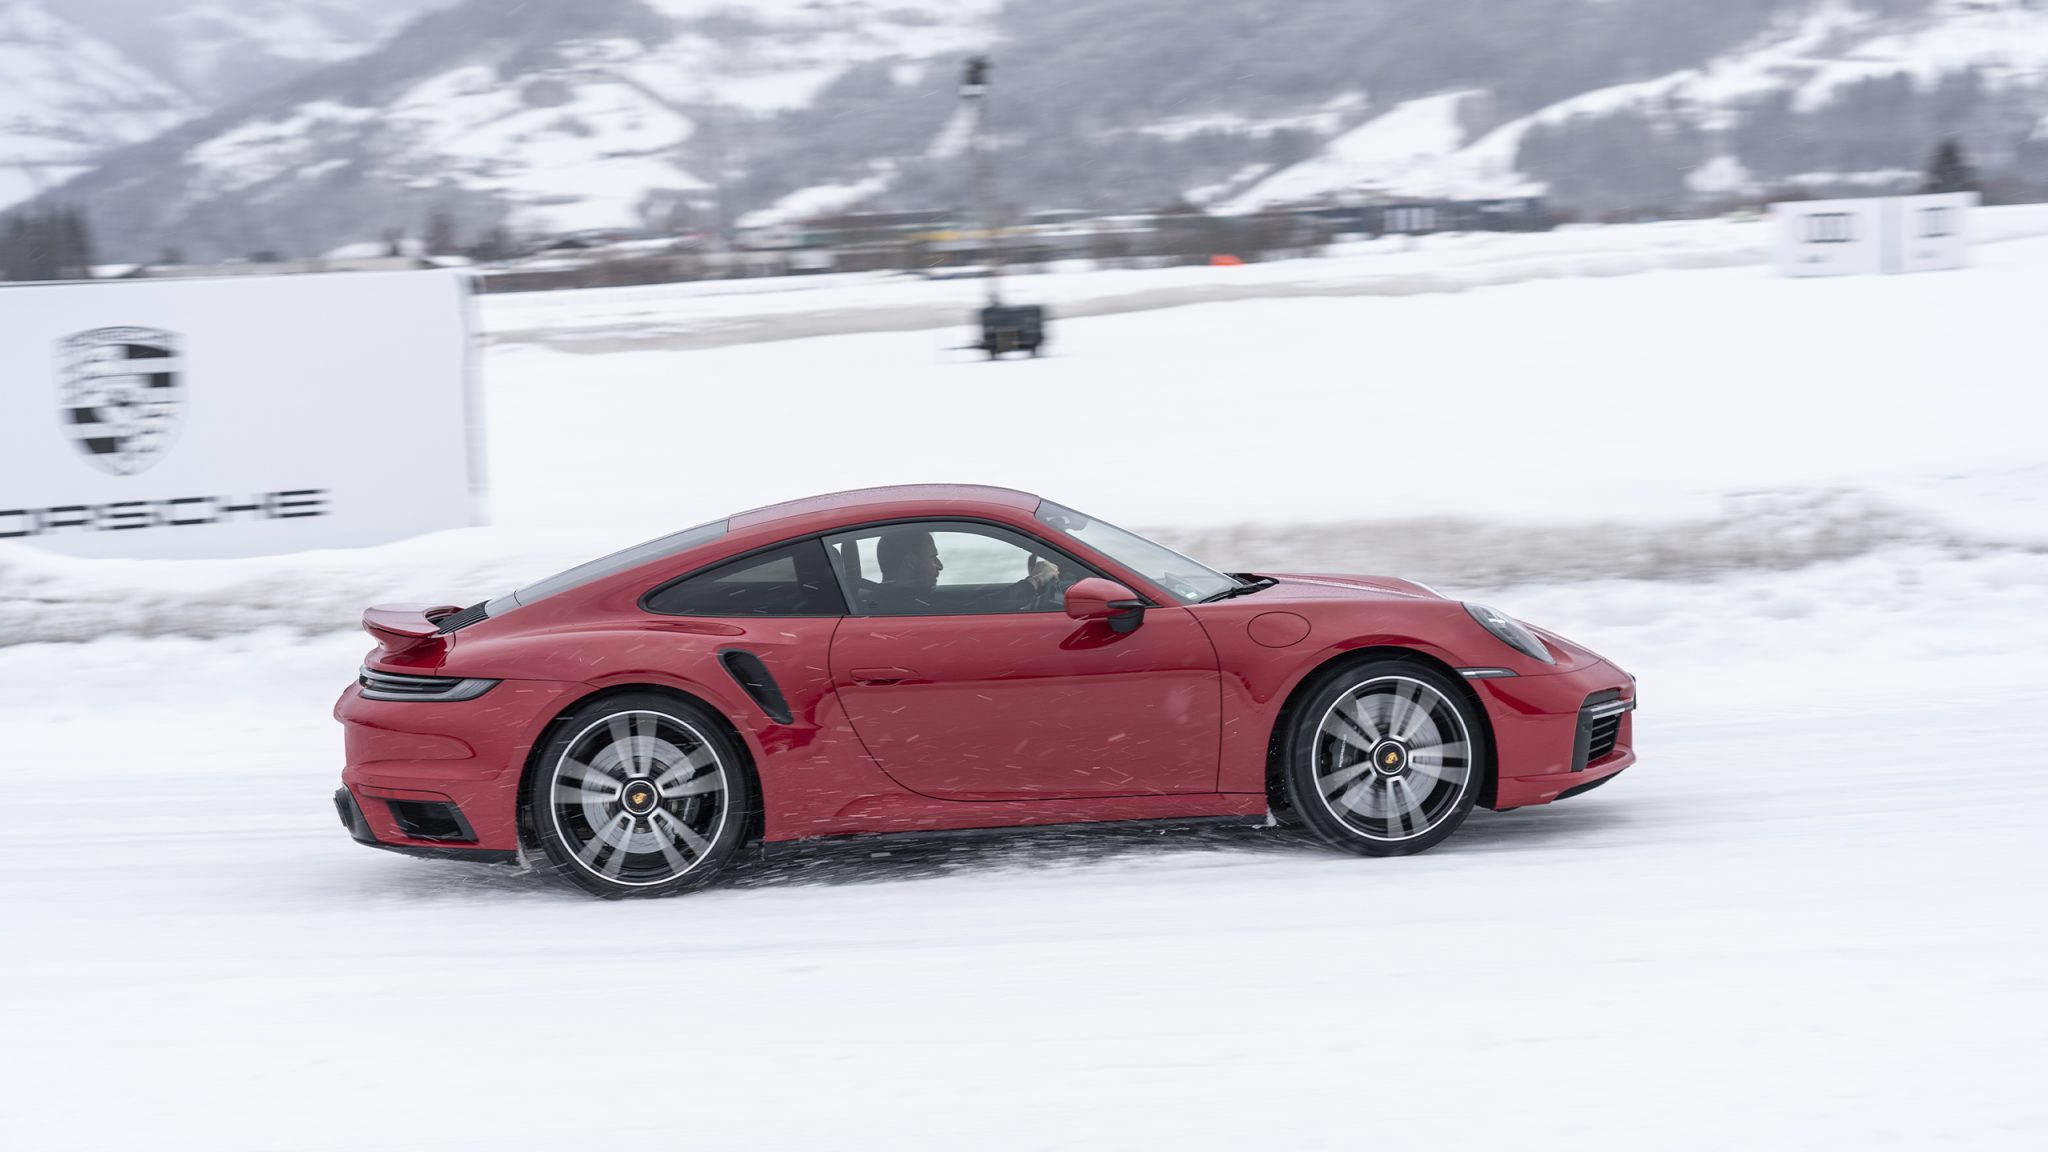 Side view of a red Porsche 911 Turbo S on the snow